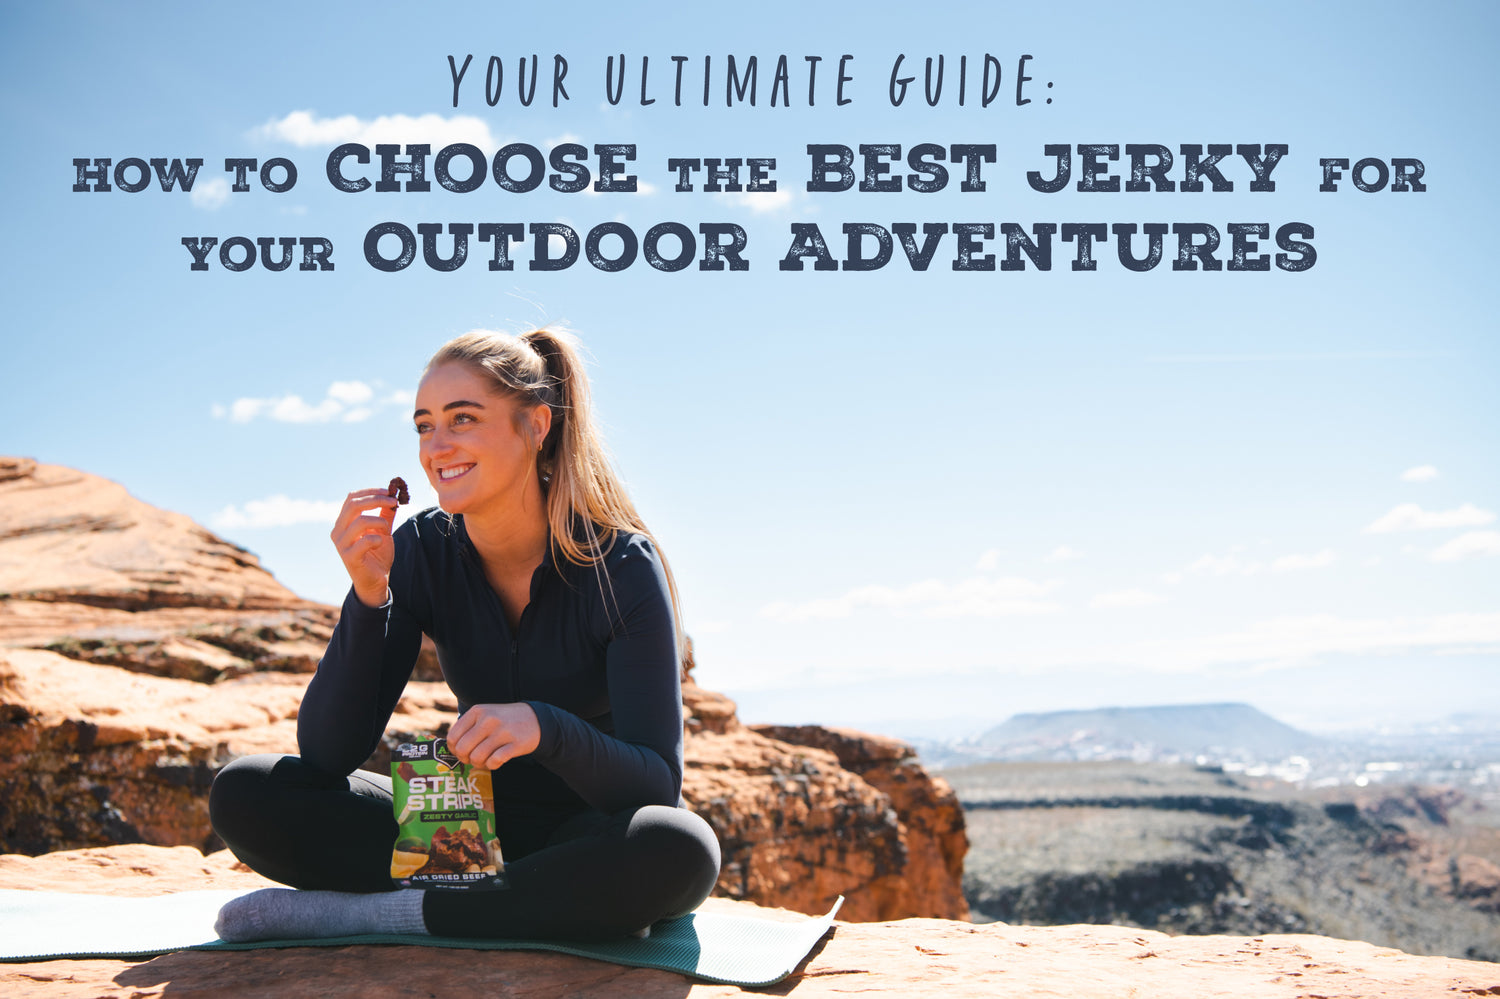 Optimize Your Outdoor Experience: Choosing the Best Jerky for Adventures